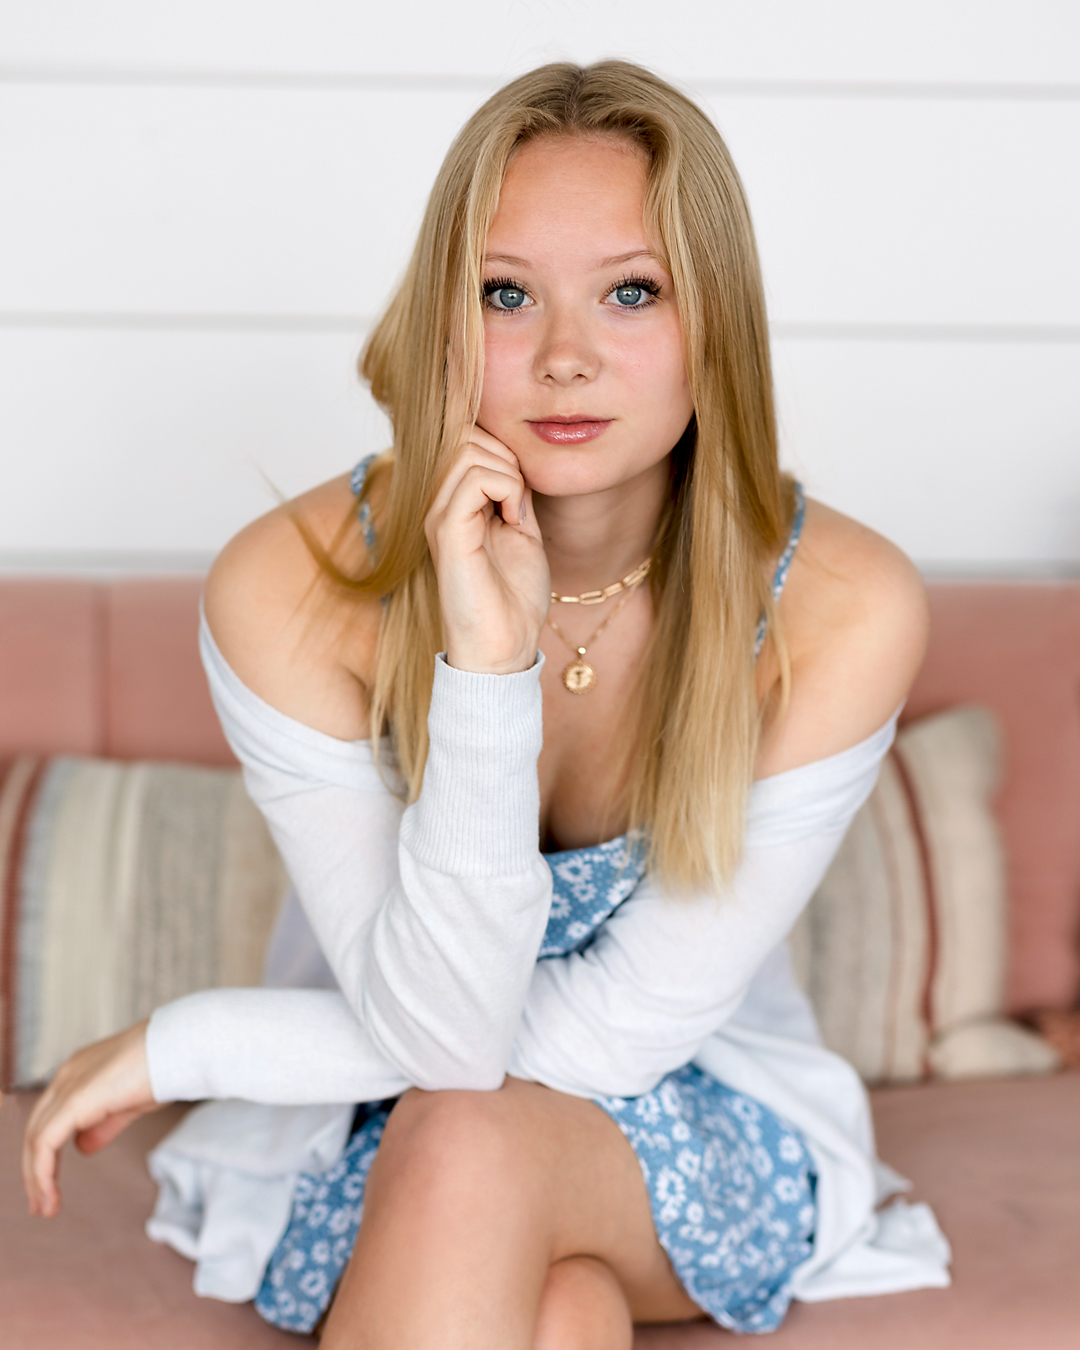 studio image of a teen with gorgeous blue eyes sitting on a pink couch